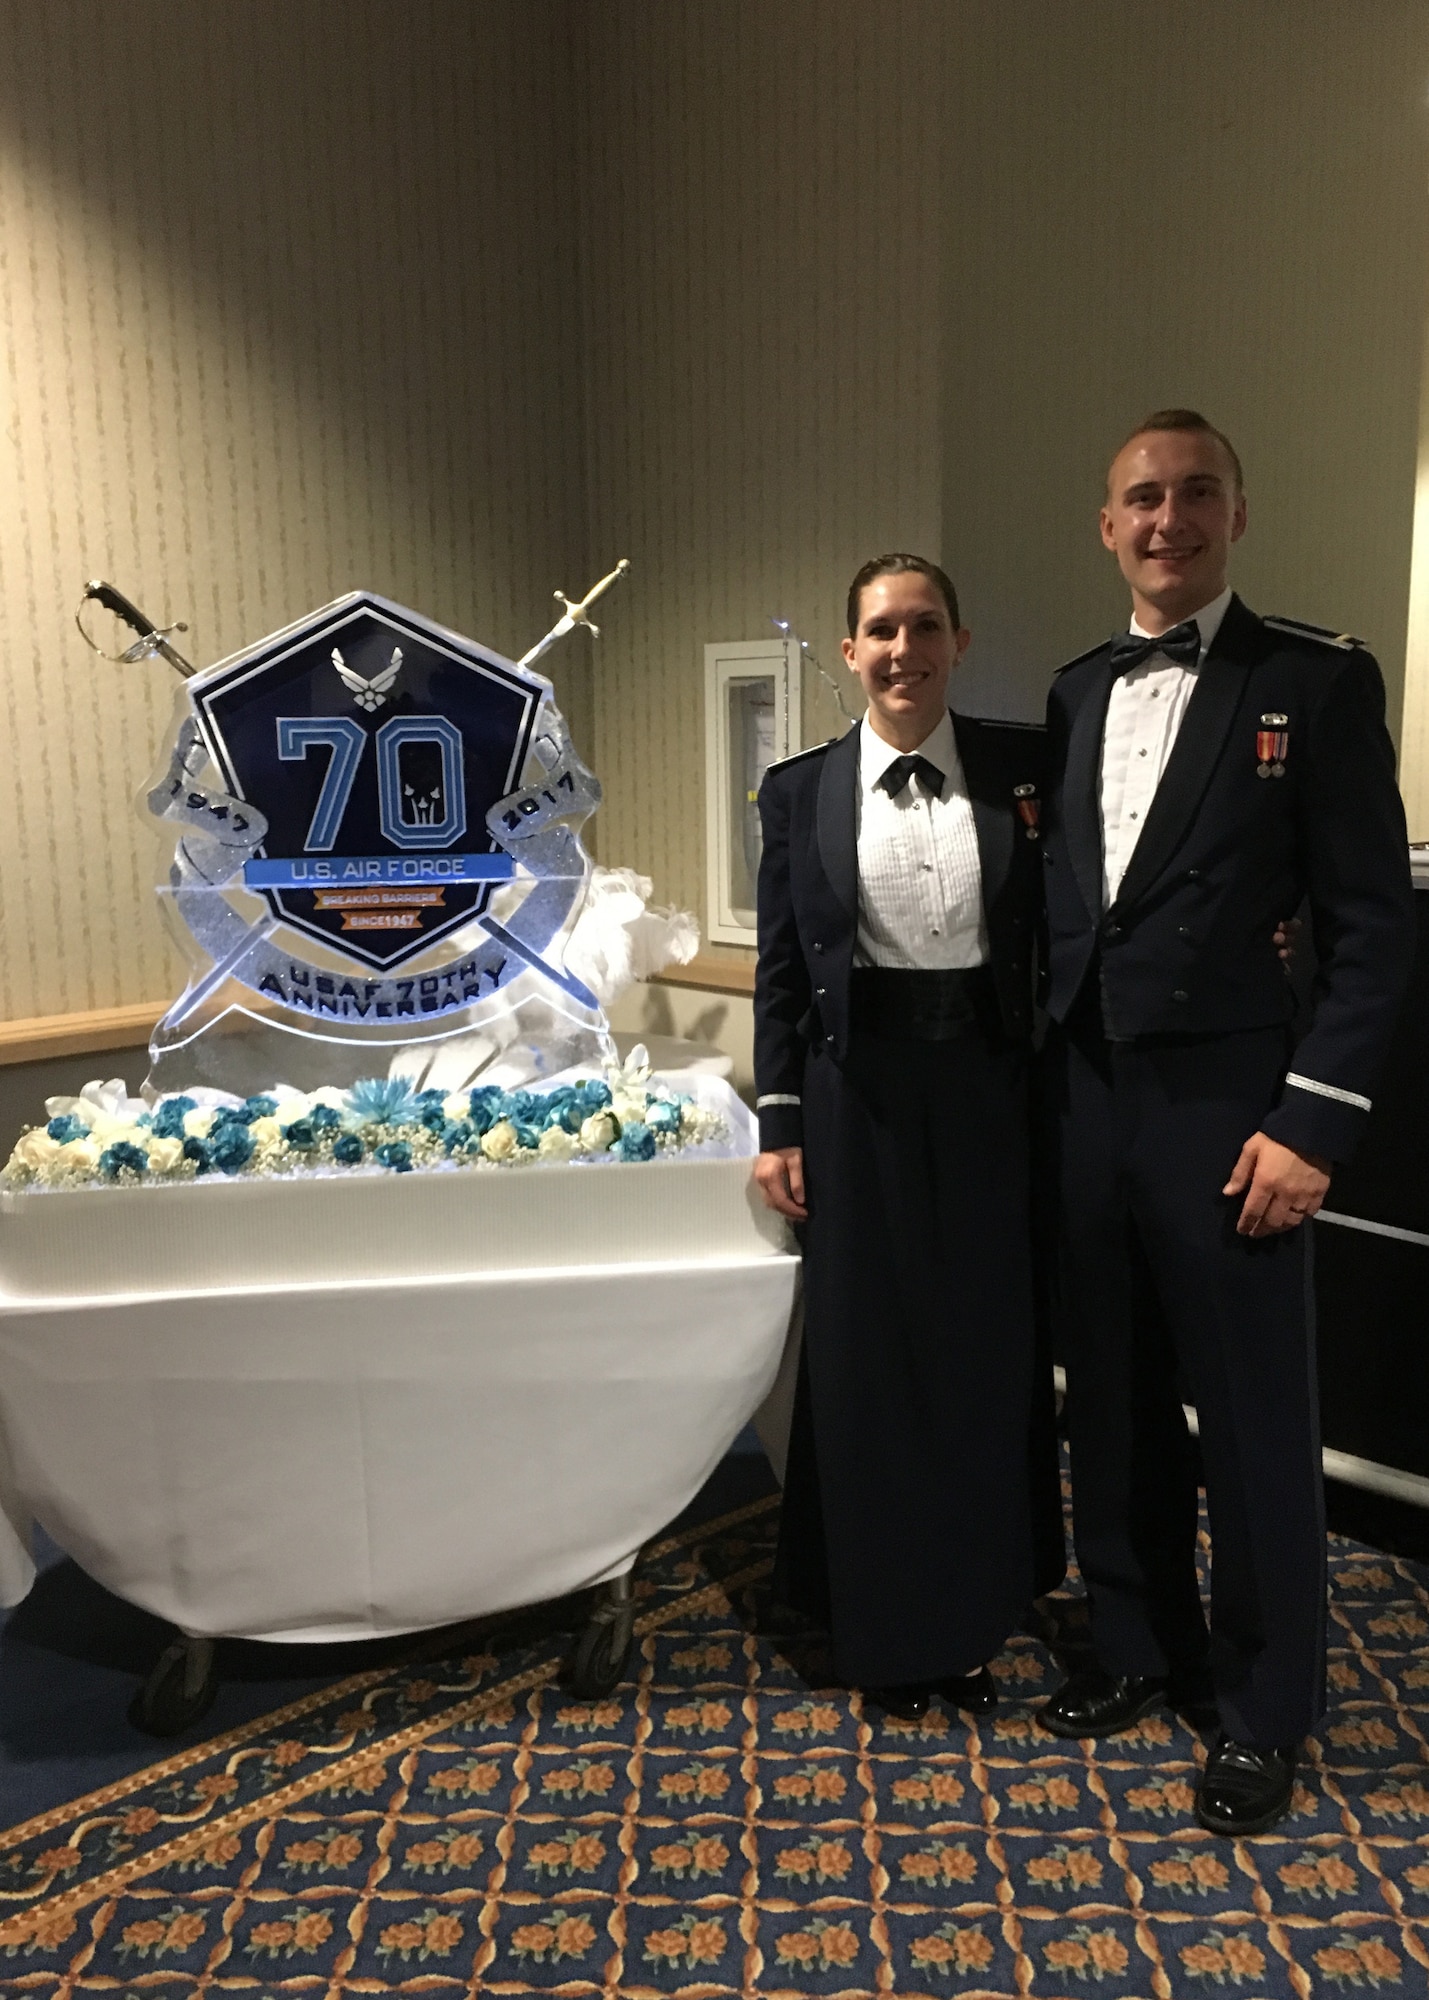 2nd Lt. Ethan Rasmussen, 30th Space Wing contracting specialist and 2nd Lt. Amy Rasmussen, 30th Space Wing public affairs officer, pose at the Air Force Ball at the Pacific Coast Club, Vandenberg Air Force Base, Calif. Sept. 8, 2017. This was the first Air Force Ball for the newly wedded couple.